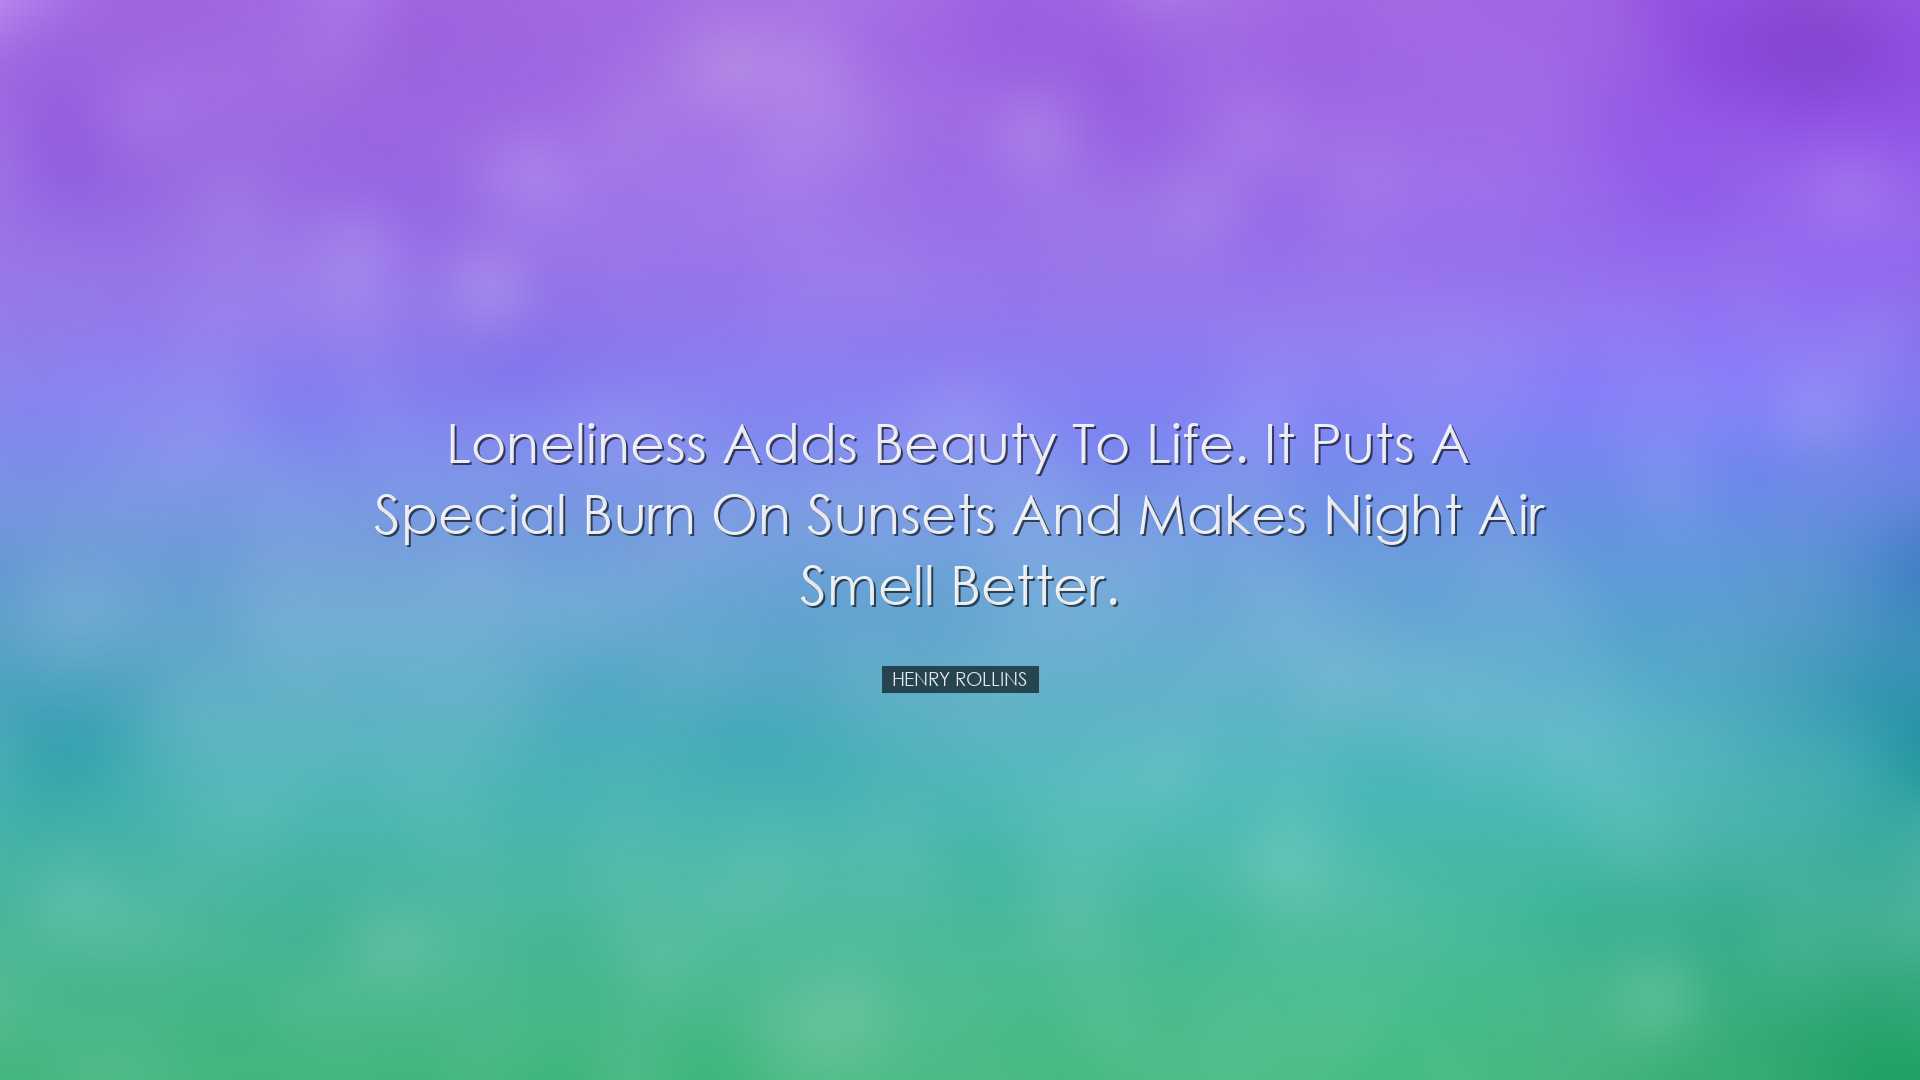 Loneliness adds beauty to life. It puts a special burn on sunsets